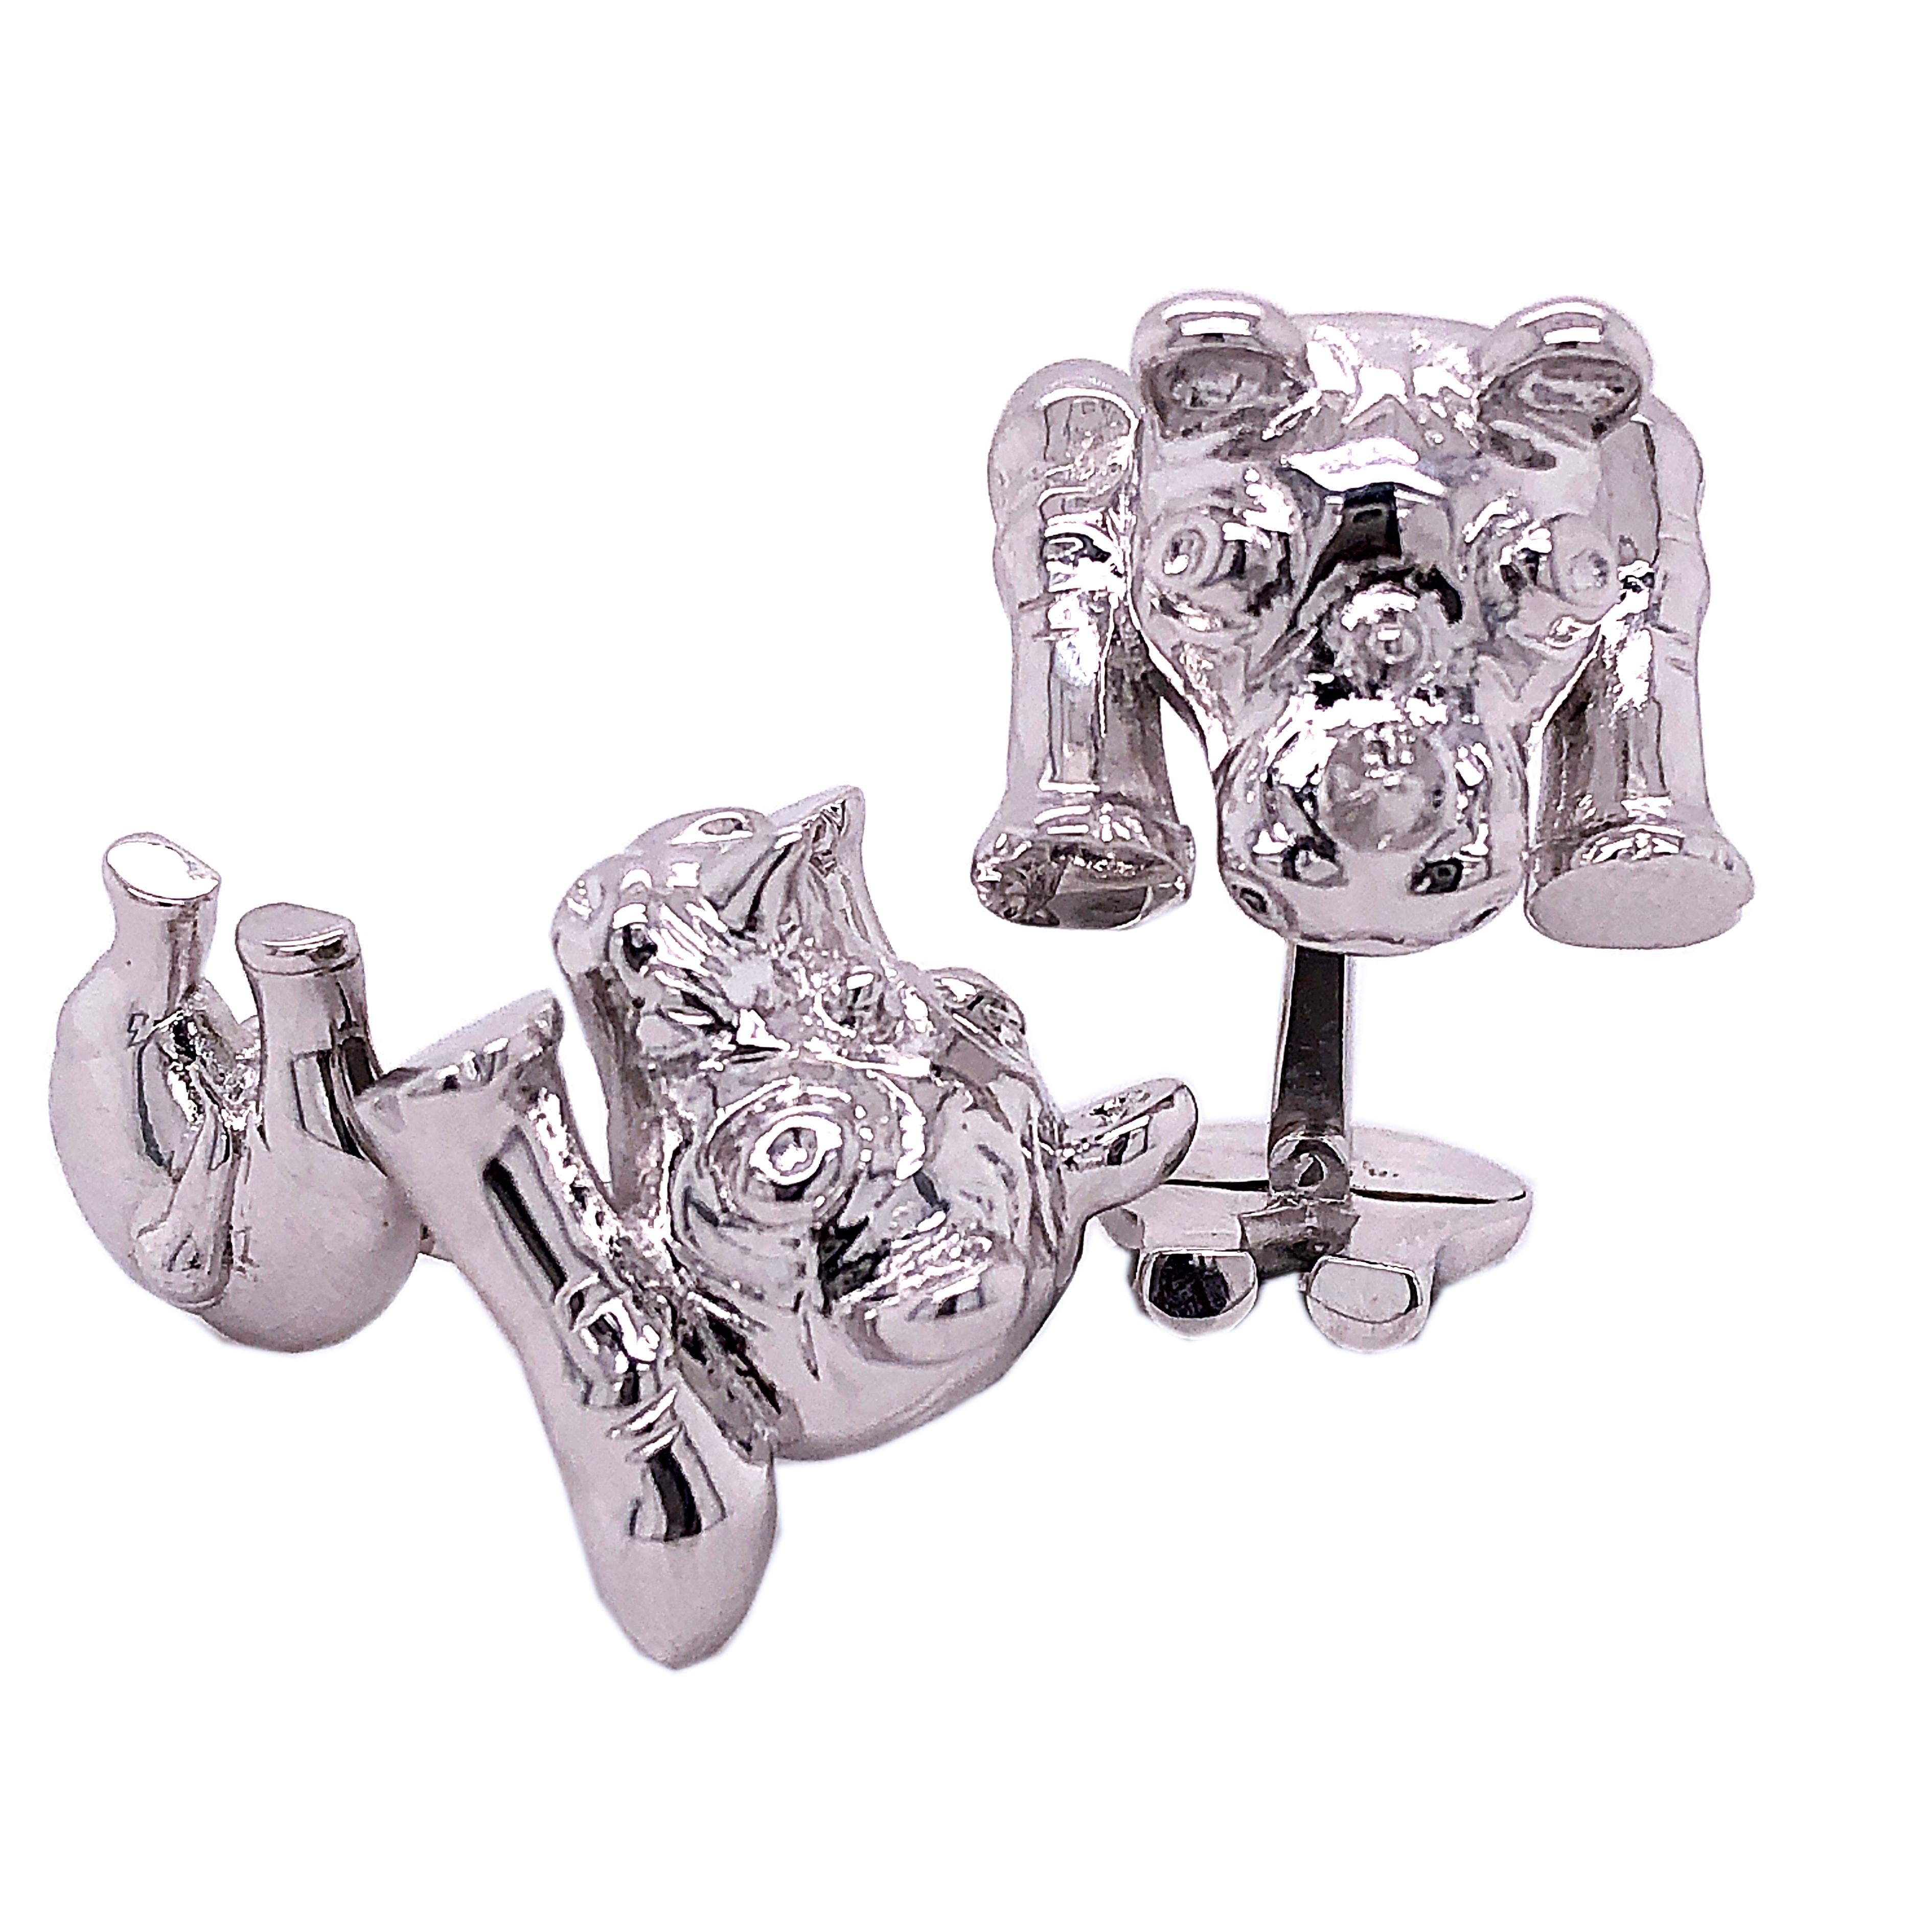 Unique, Absolutely Chic, Hand Crafted, Hand Engraved by our expert Silversmiths  Rhinoceros Shaped Solid Sterling Silver Cufflinks.

In our Smart Black Box and Pouch.
